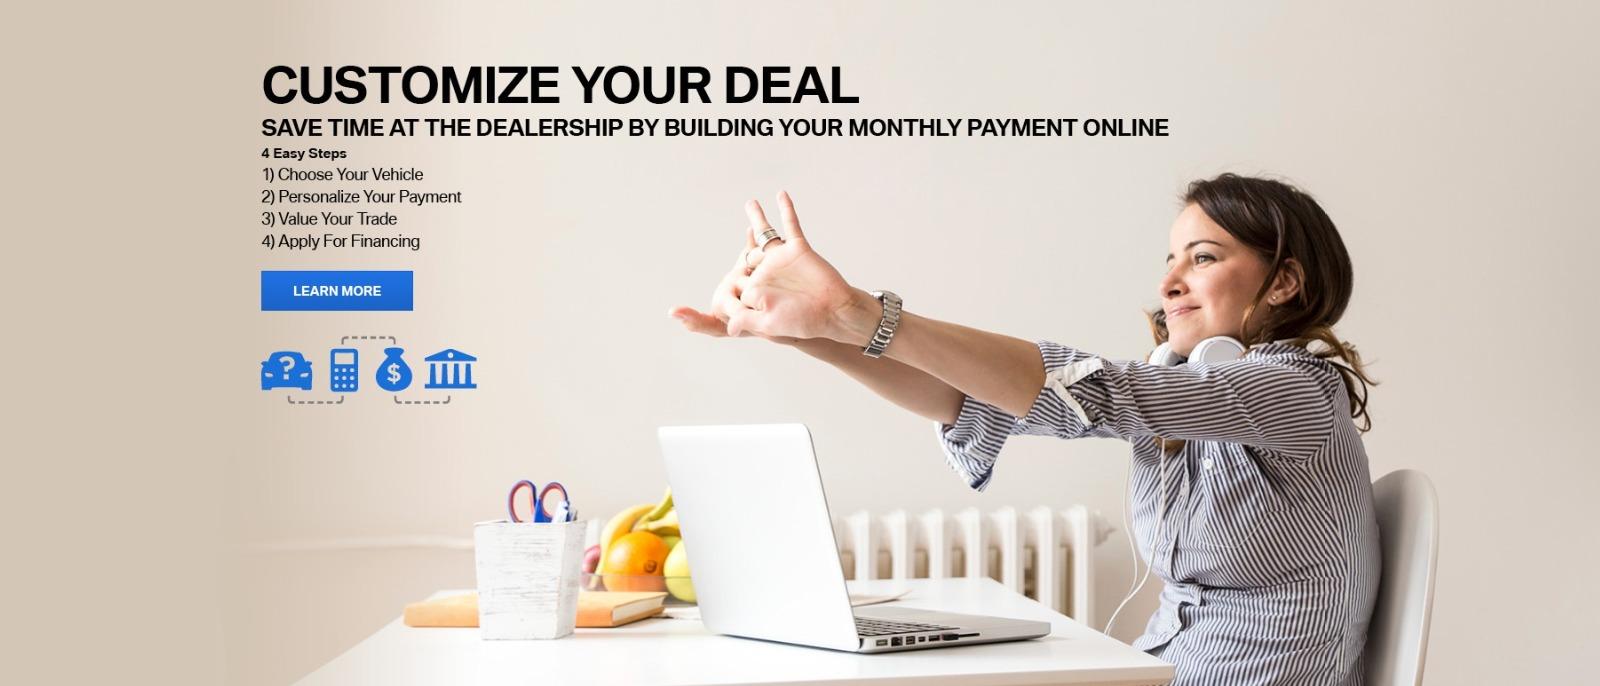 CUSTOMIZE YOUR DEAL 
SAVE TIME AT THE DEALERSHIP BY BUILDING YOUR MONTHLY PAYMENT ONLINE 
4 Easy Steps 
1) Choose Your Vehicle 
2) Personalize Your Payment 
3) Value Your Trade 
4) Apply For Financing